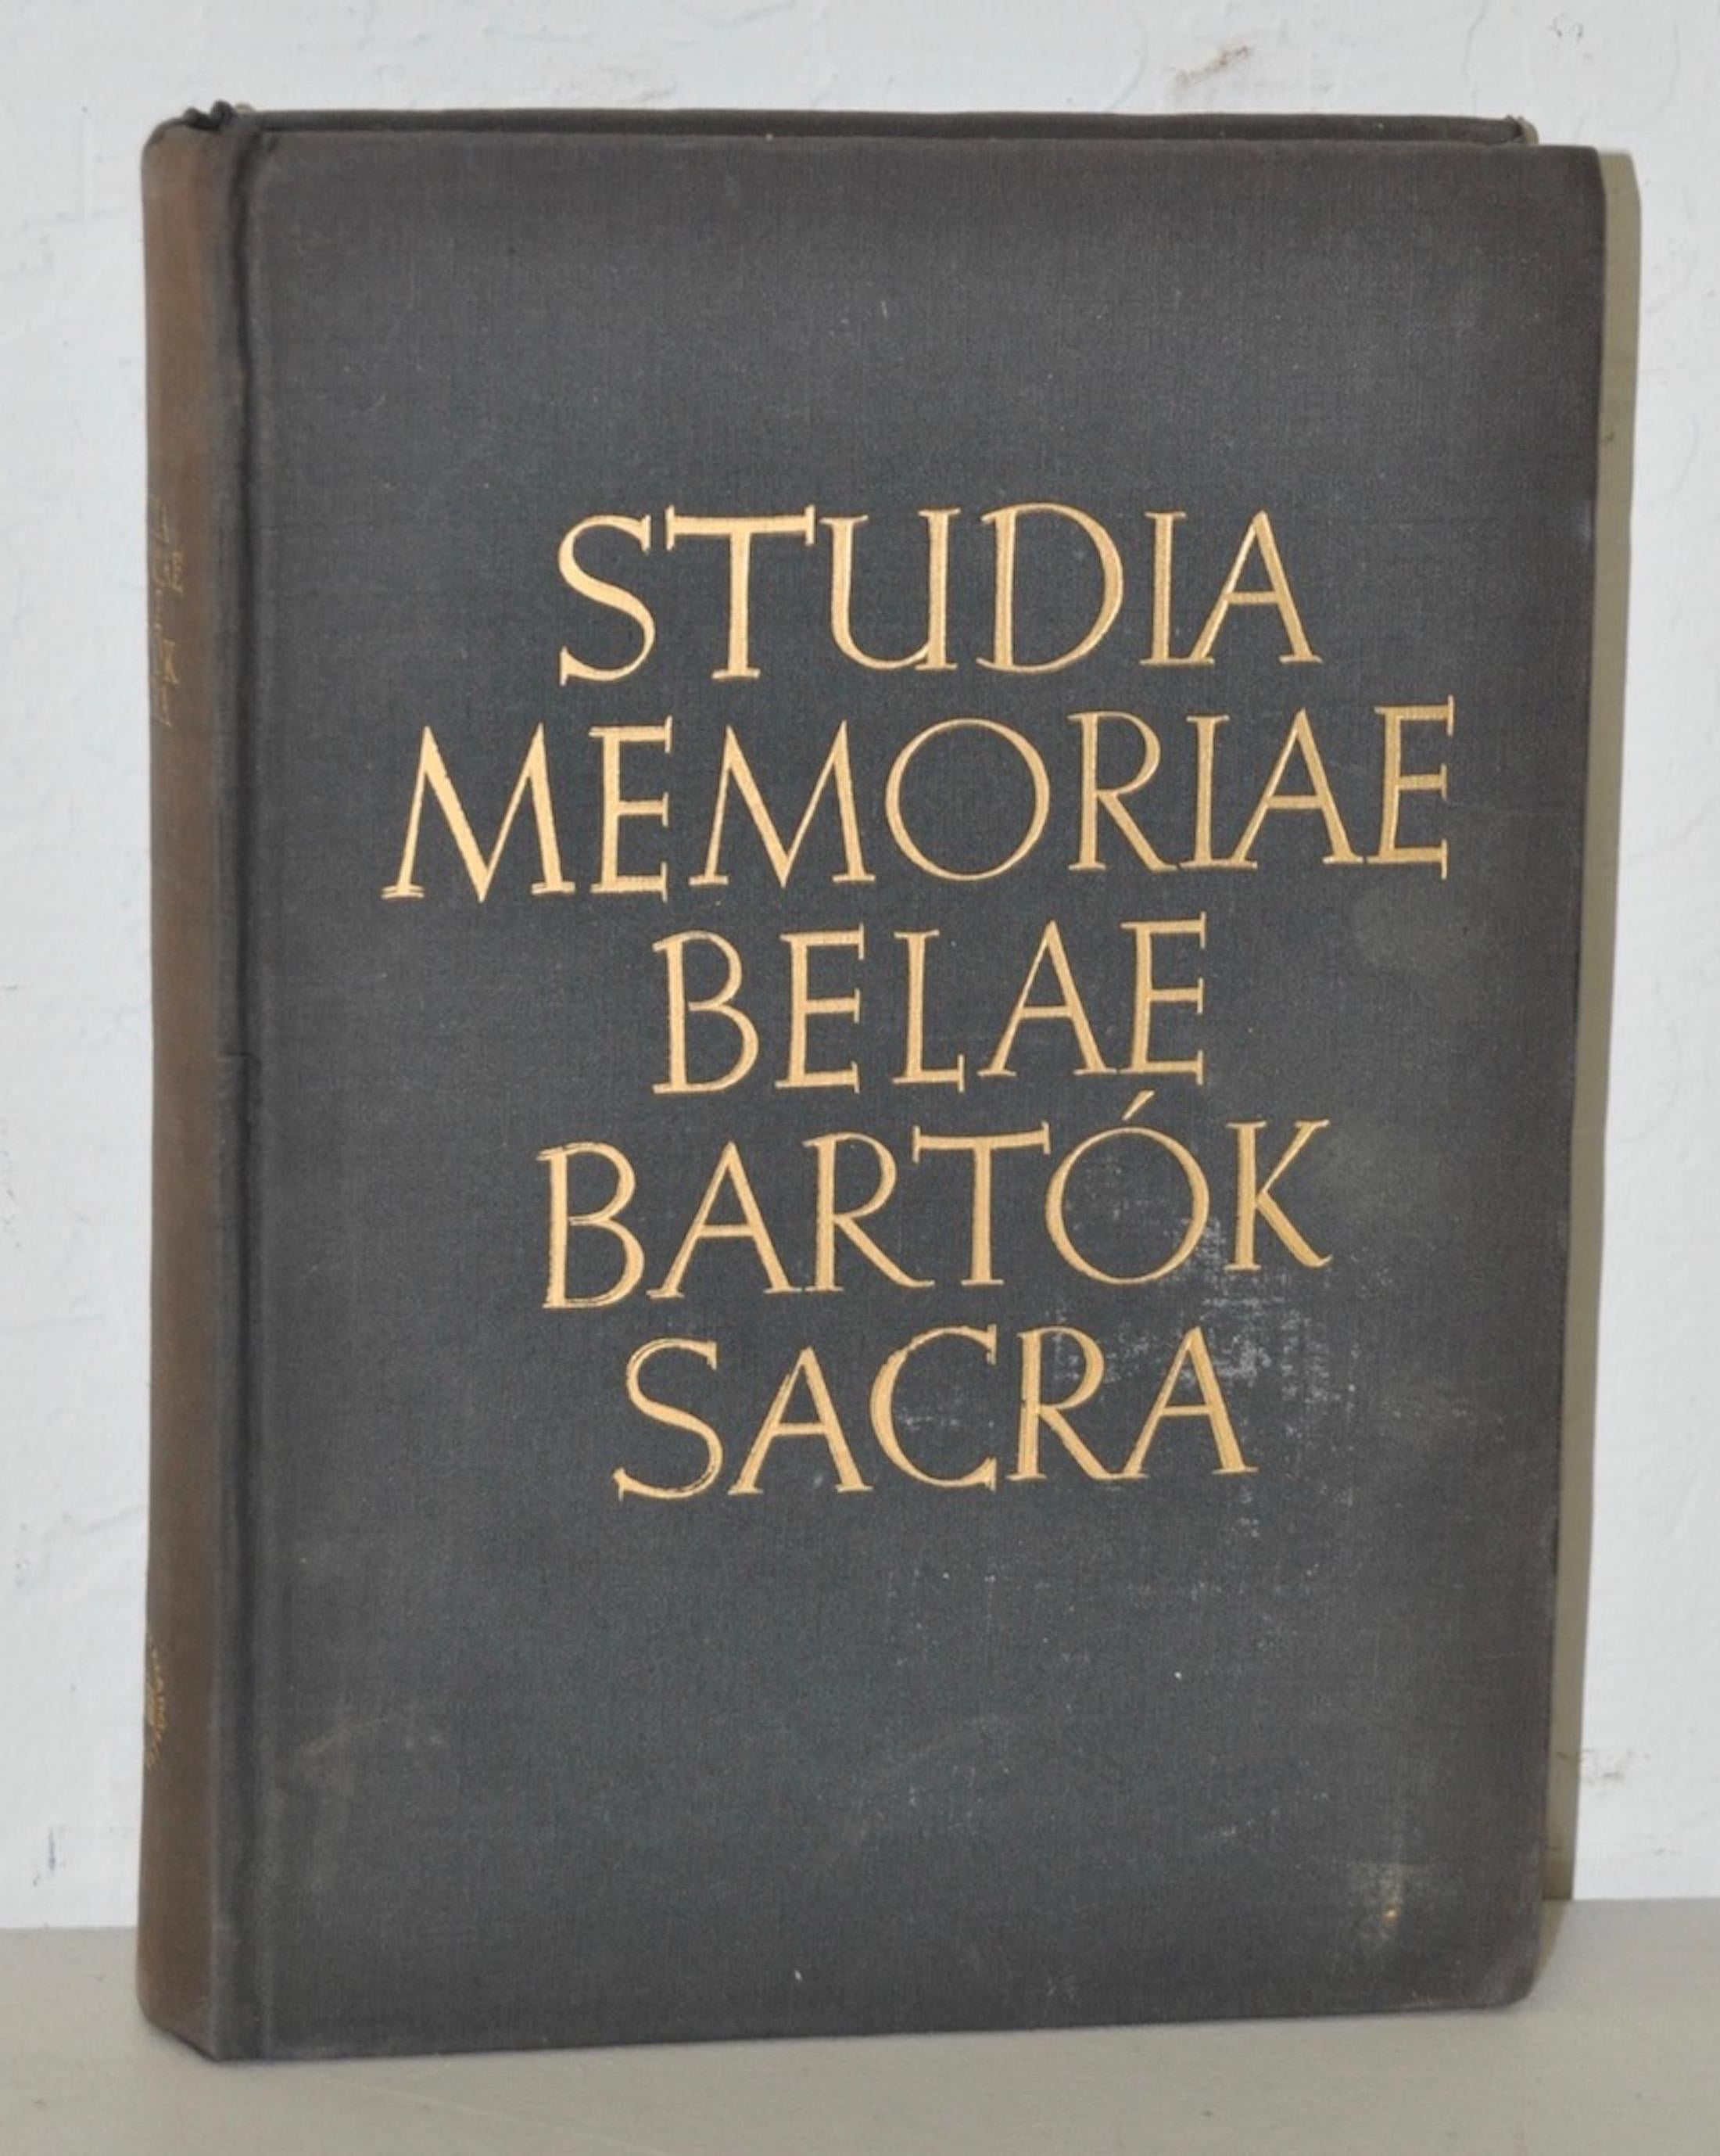 Studia Memoriae Belae Bartok Sacra circa 1958 signed by Paul Robeson (personal copy) *rare*

Rare first edition book on Béla Bartók signed twice by Paul Robeson as his personal copy.

The book is in good vintage condition with separation at the